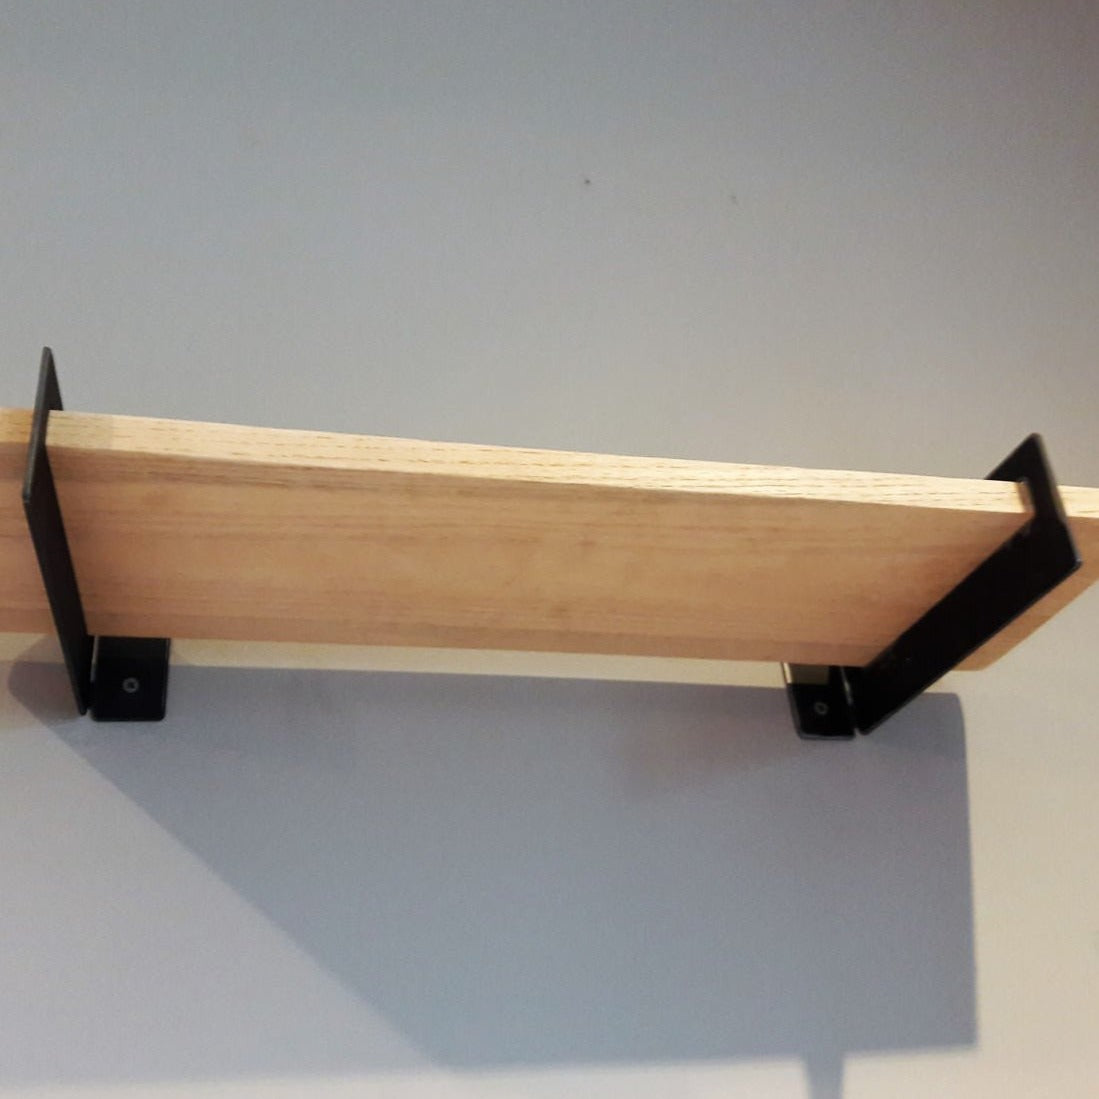 Using Shelf Standards and Brackets from Different Manufacturers